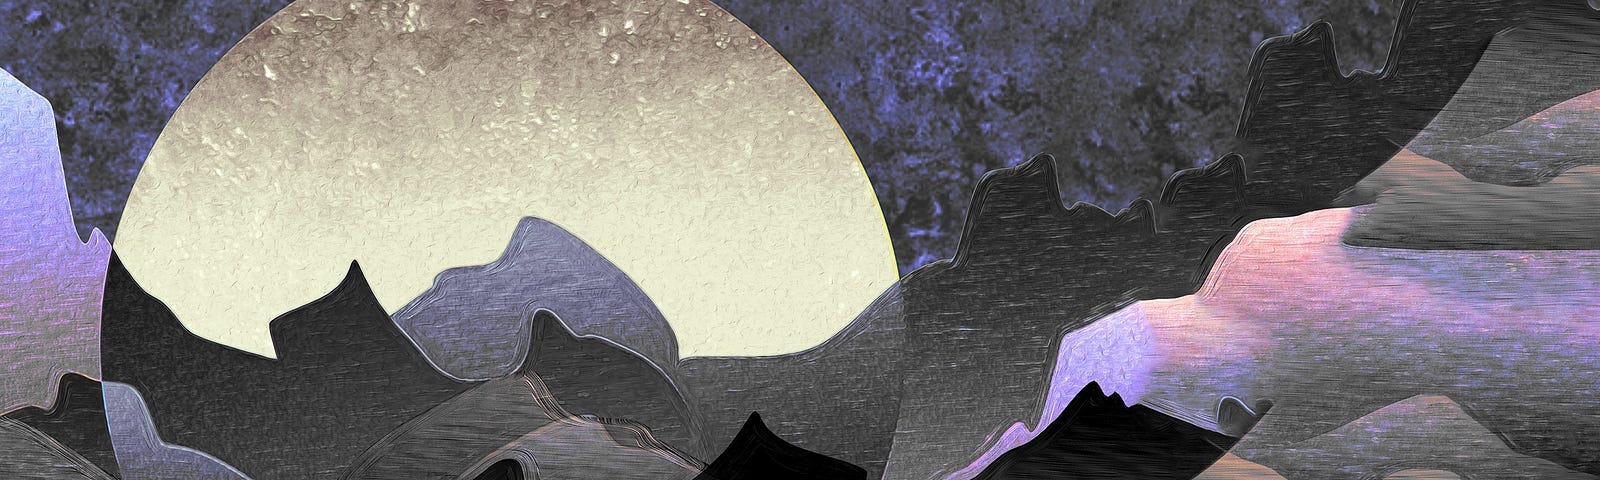 Purple & grey textured illustration of overlapping mountains and central image of moon holding shadow image of landscape.